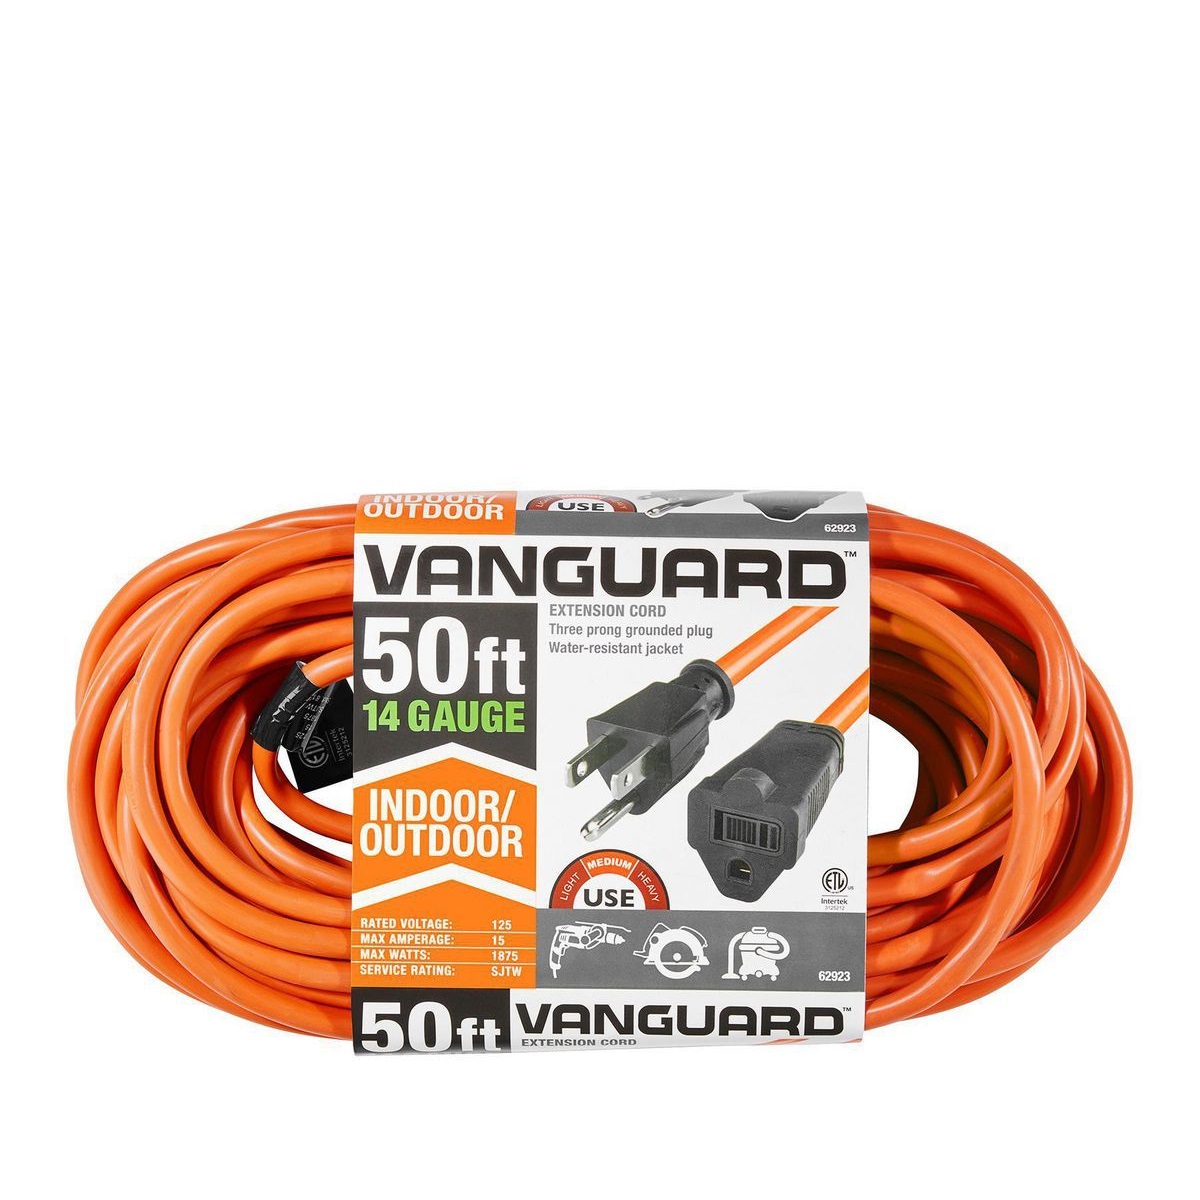 Fifty ft extension cord